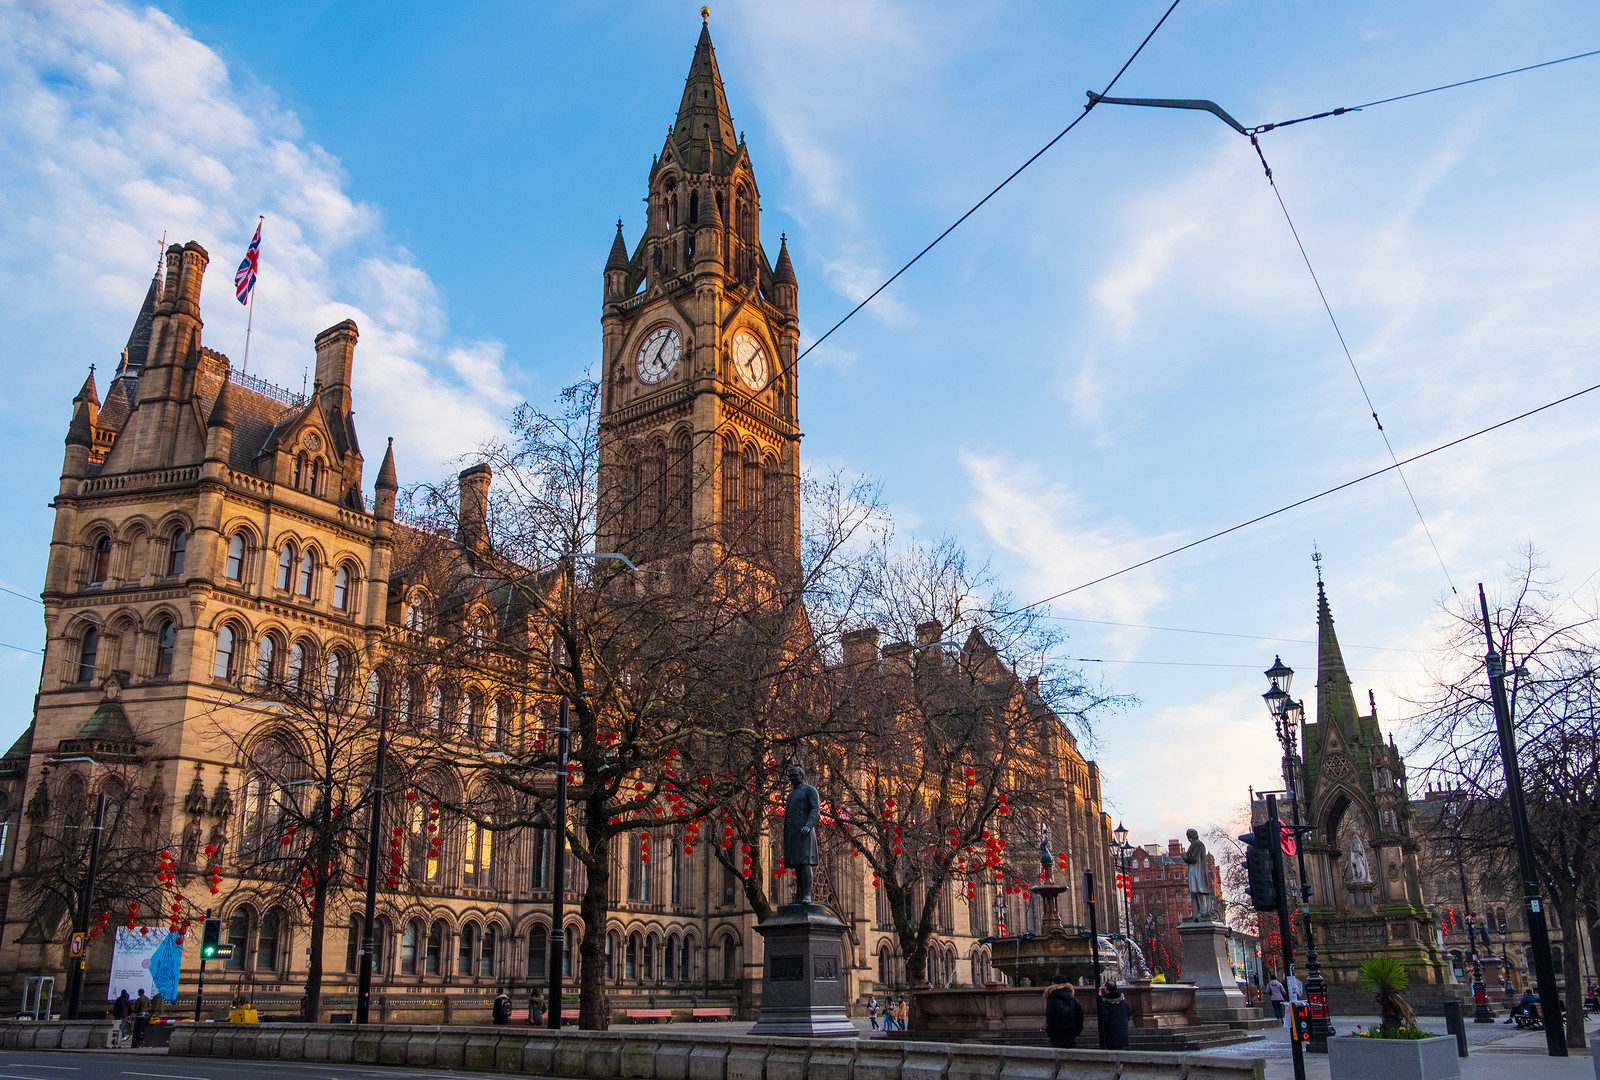 What exactly you can now be fined £100 for in Greater Manchester under new legislation, The Manc